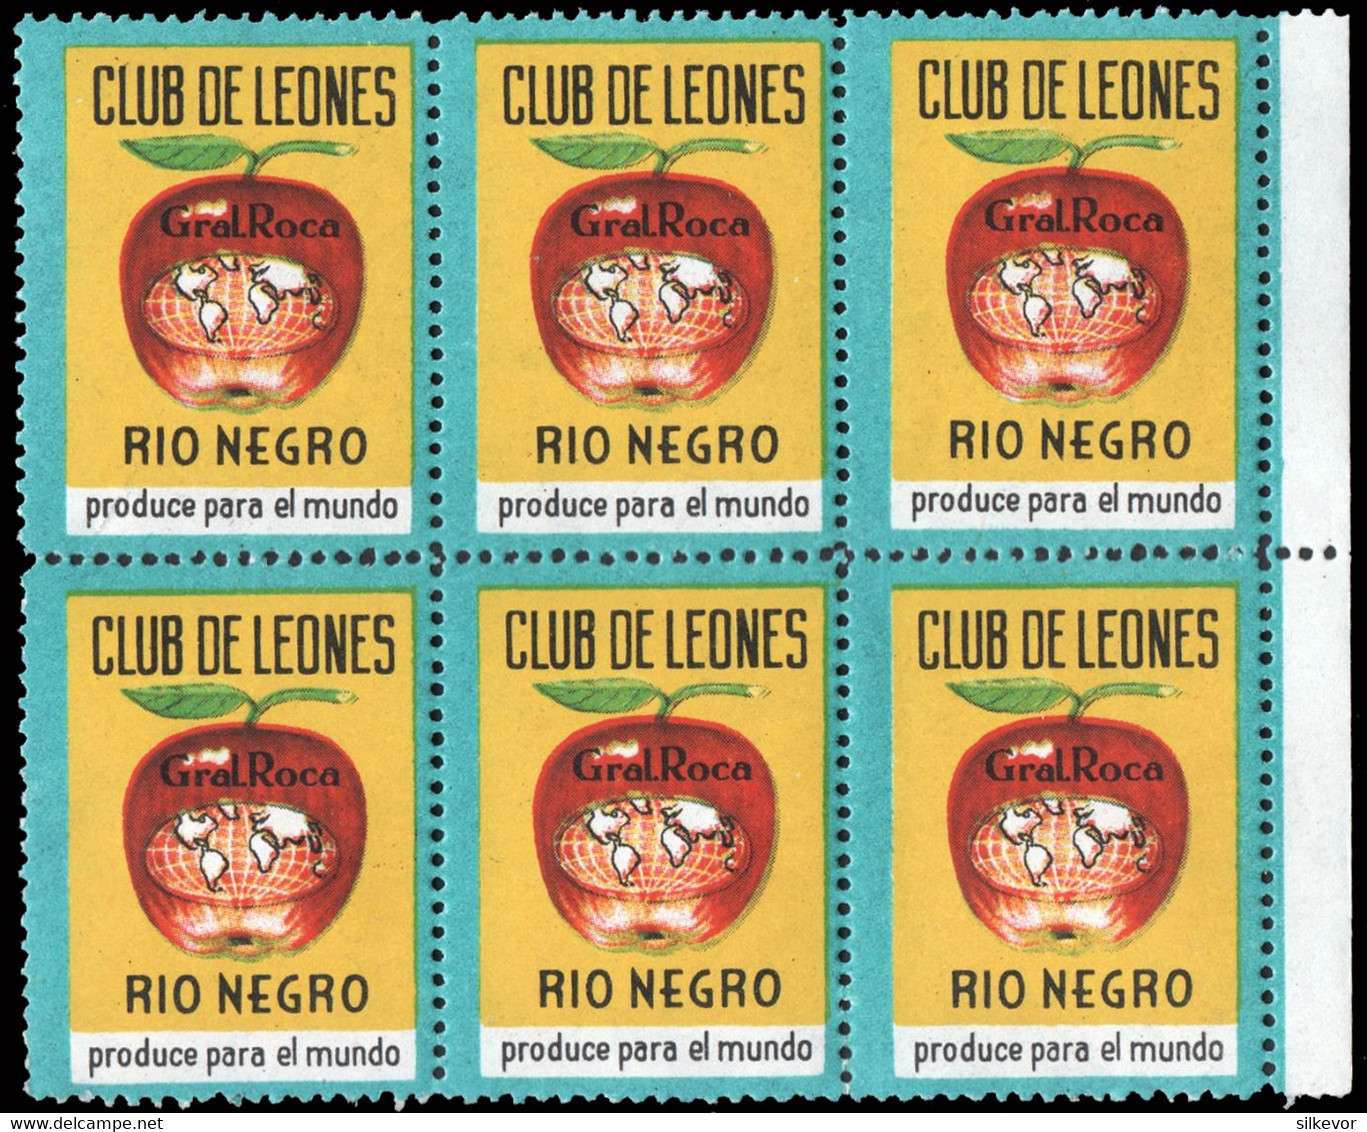 LIONS CLUB-STAMPS-ARGENTINA-CINDERELLA ISSUED IN  1964 BY GENERAL ROCA LIONS CLUB( RIO NEGRO PROVINCE) - Affrancature Meccaniche/Frama